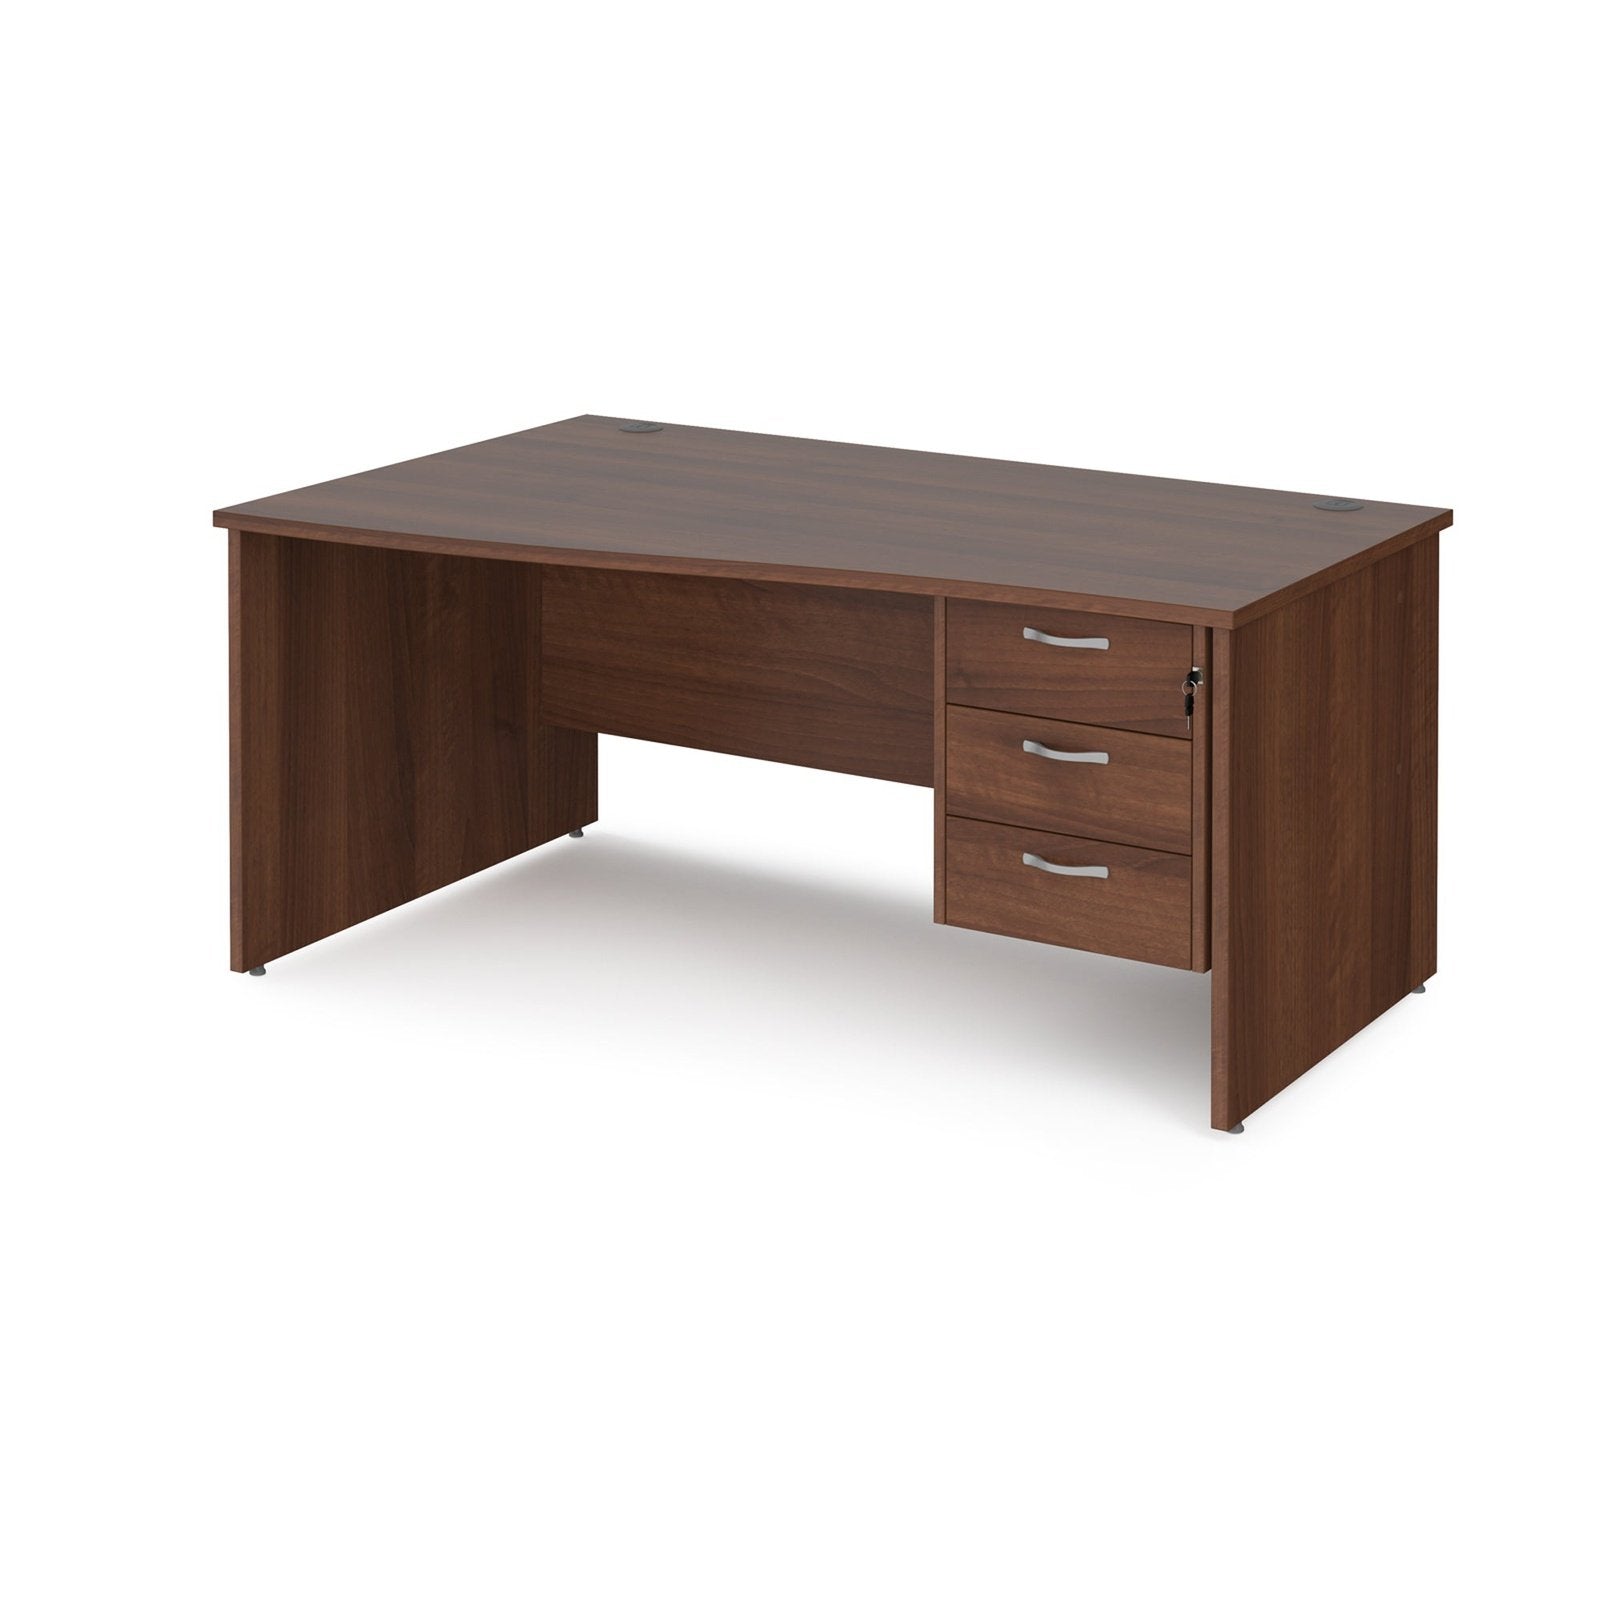 Maestro 25 panel leg left hand wave desk with 3 drawer pedestal - Office Products Online